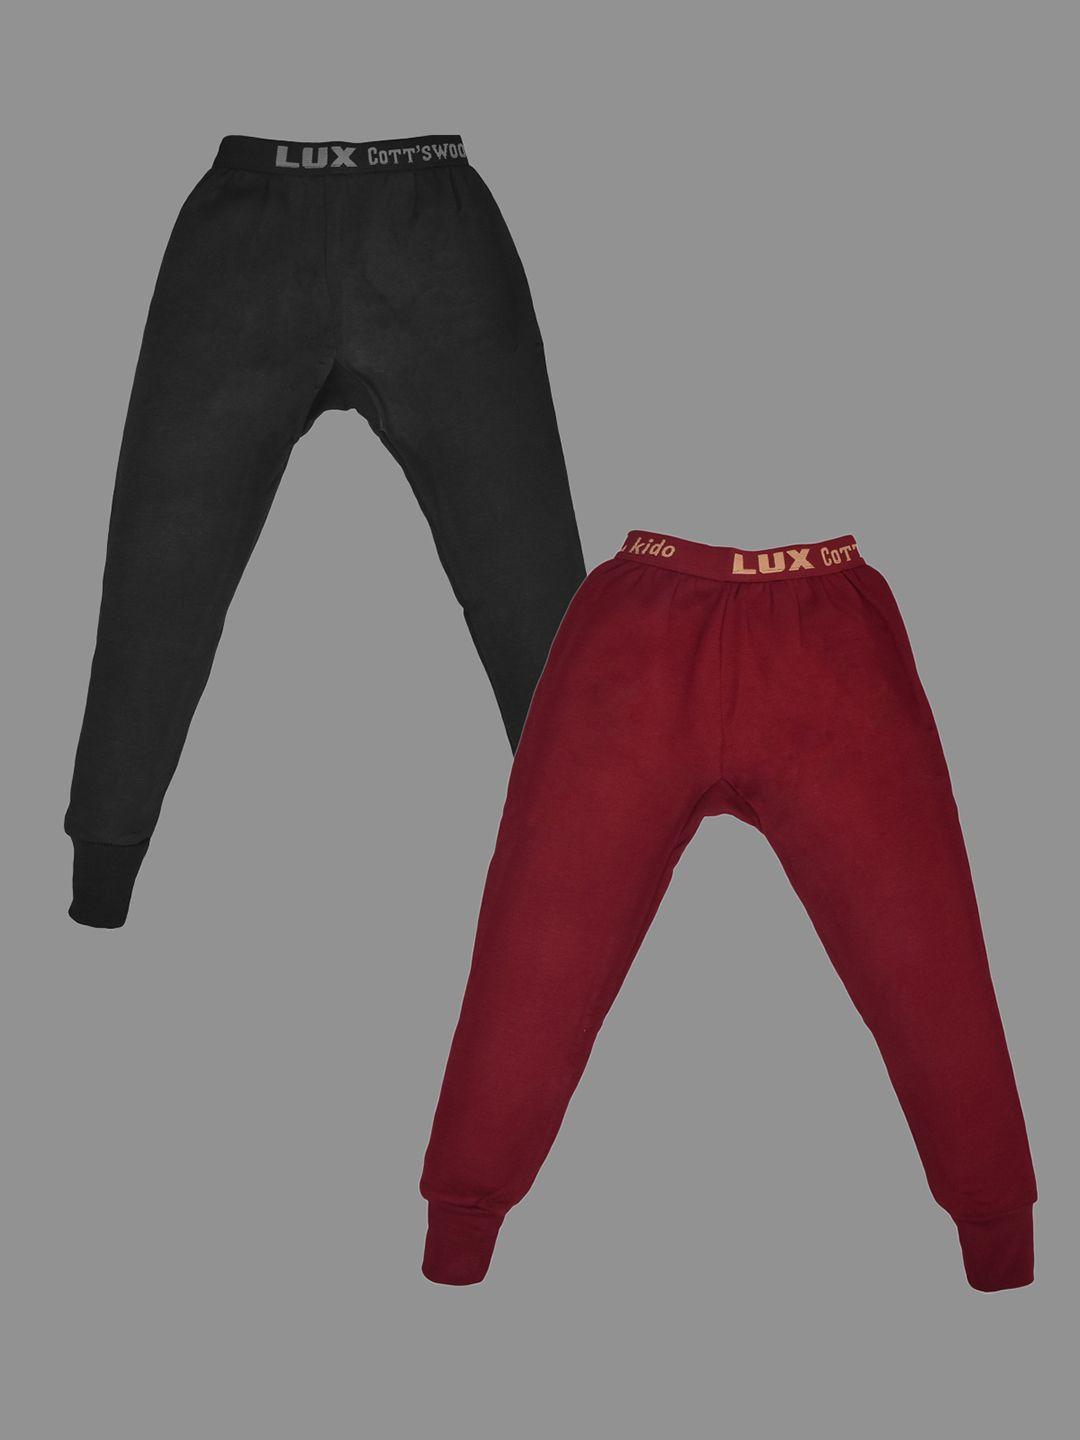 lux cottswool boys pack of 2 maroon & black solid cotton thermal bottoms